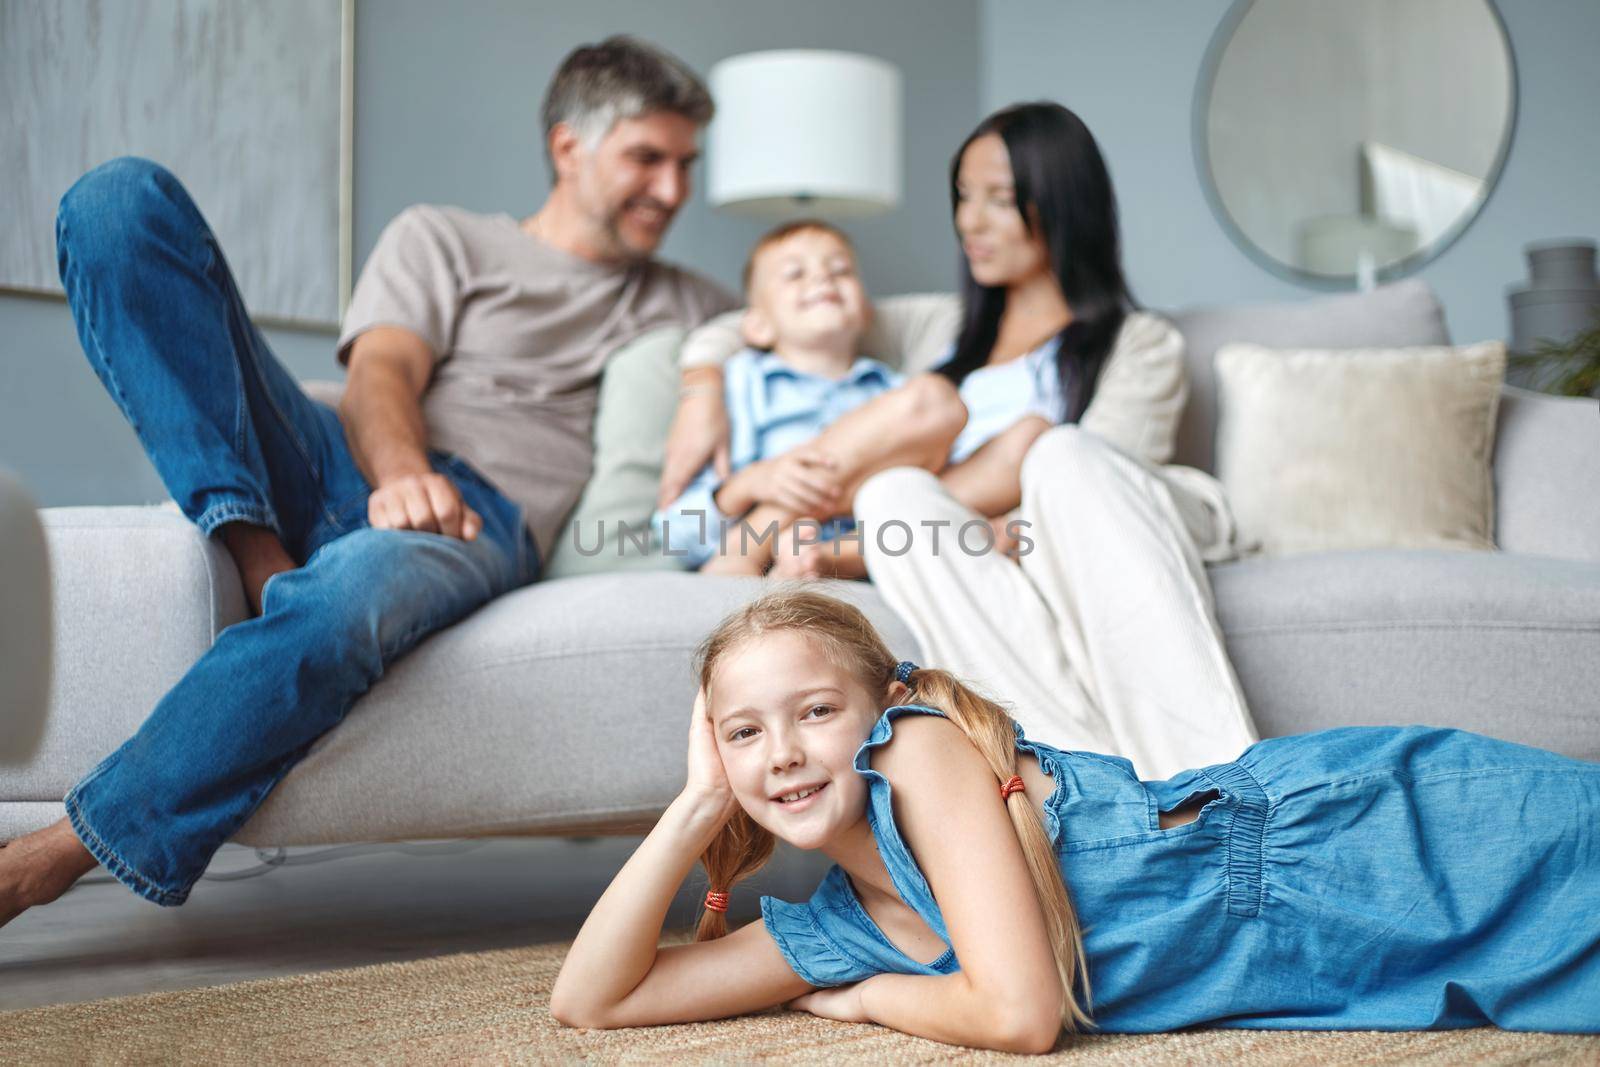 Cute little girl lying on the floor and smiling at camera. Family staying at home.